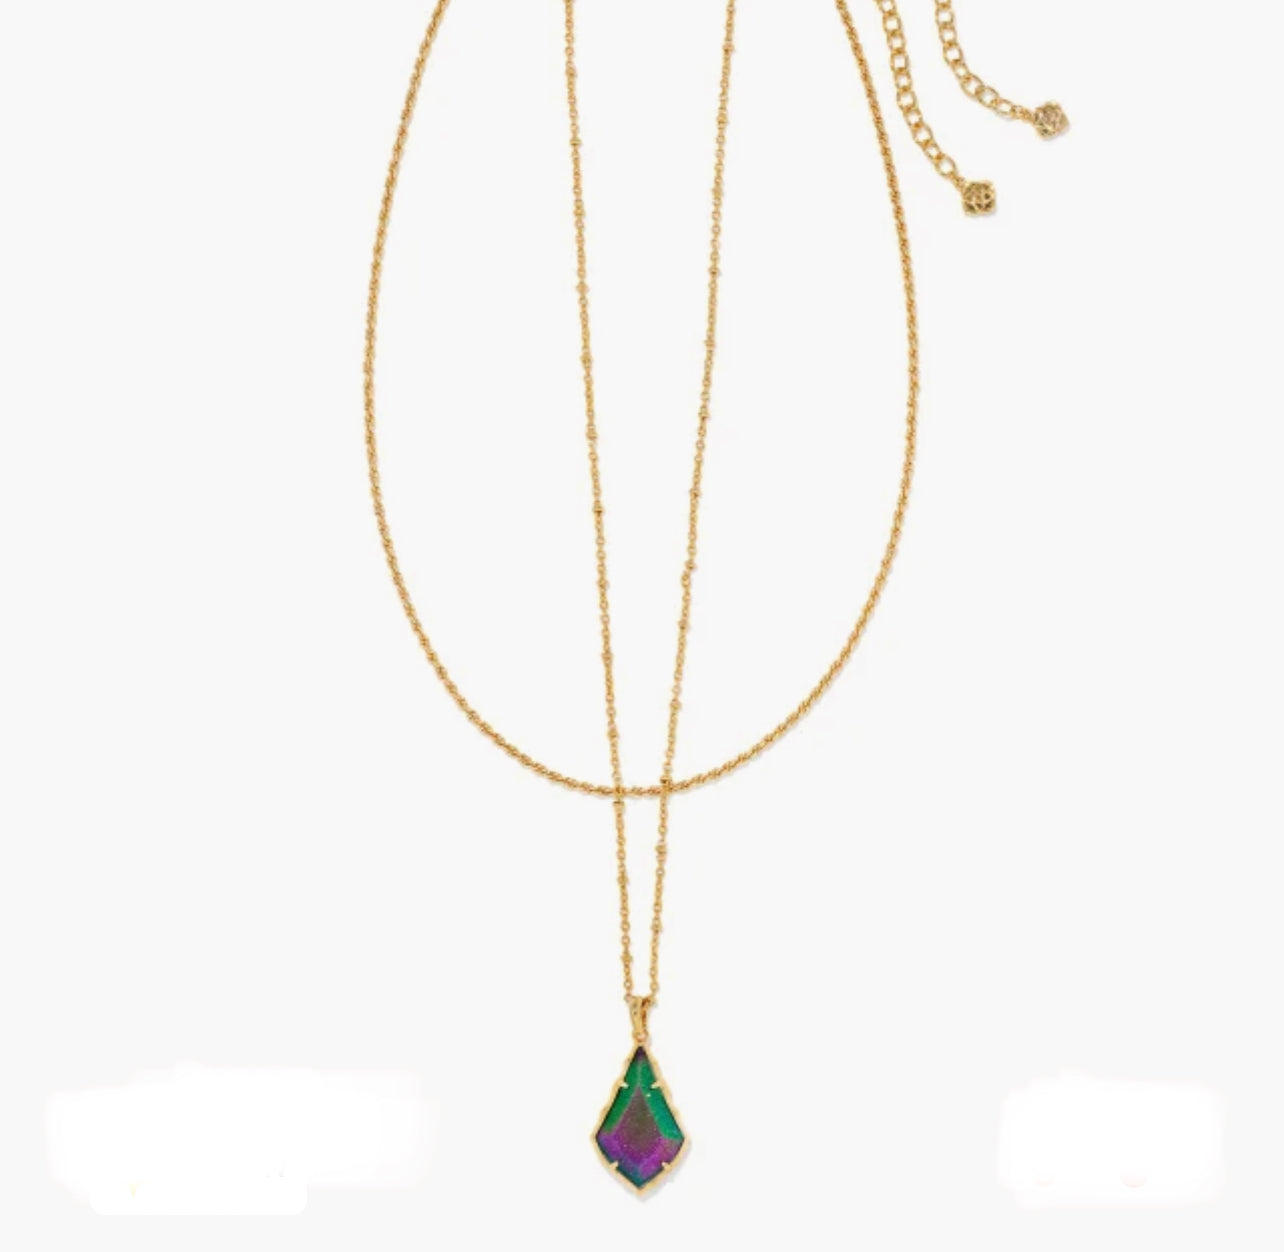 Kendra Scott-Faceted Alex Gold Convertible Necklace in Iridescent Blue Gstn 9608802915